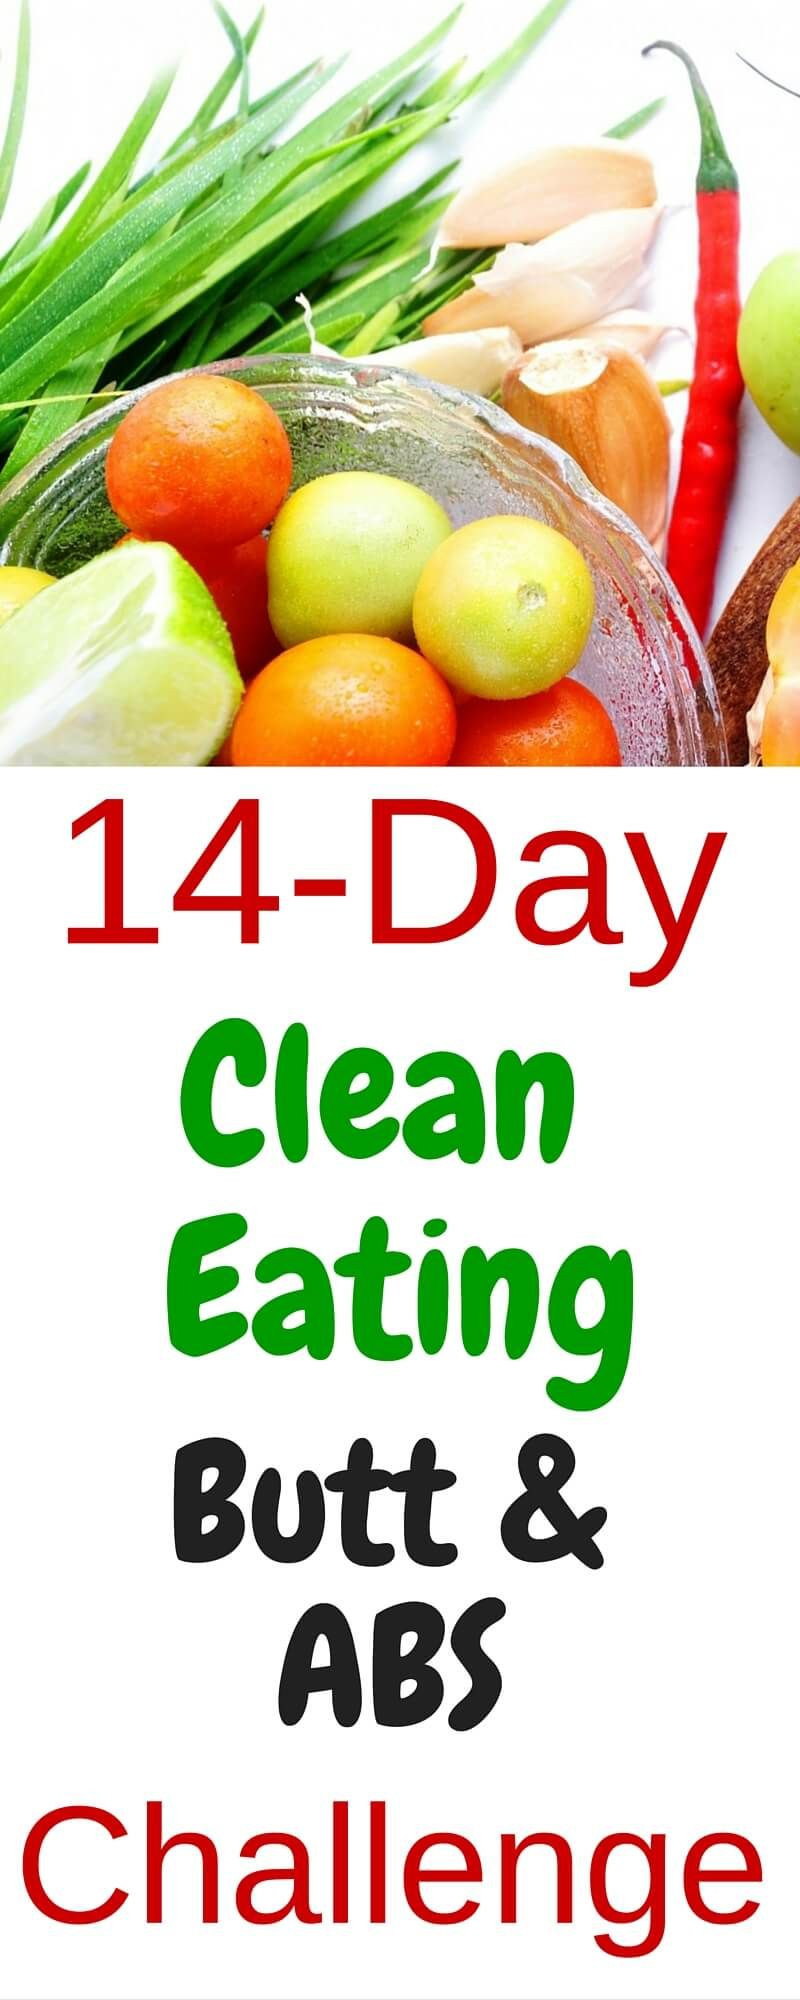 14 Day Clean Eating Meal Plan
 14 Day Clean Eating Challenge 4